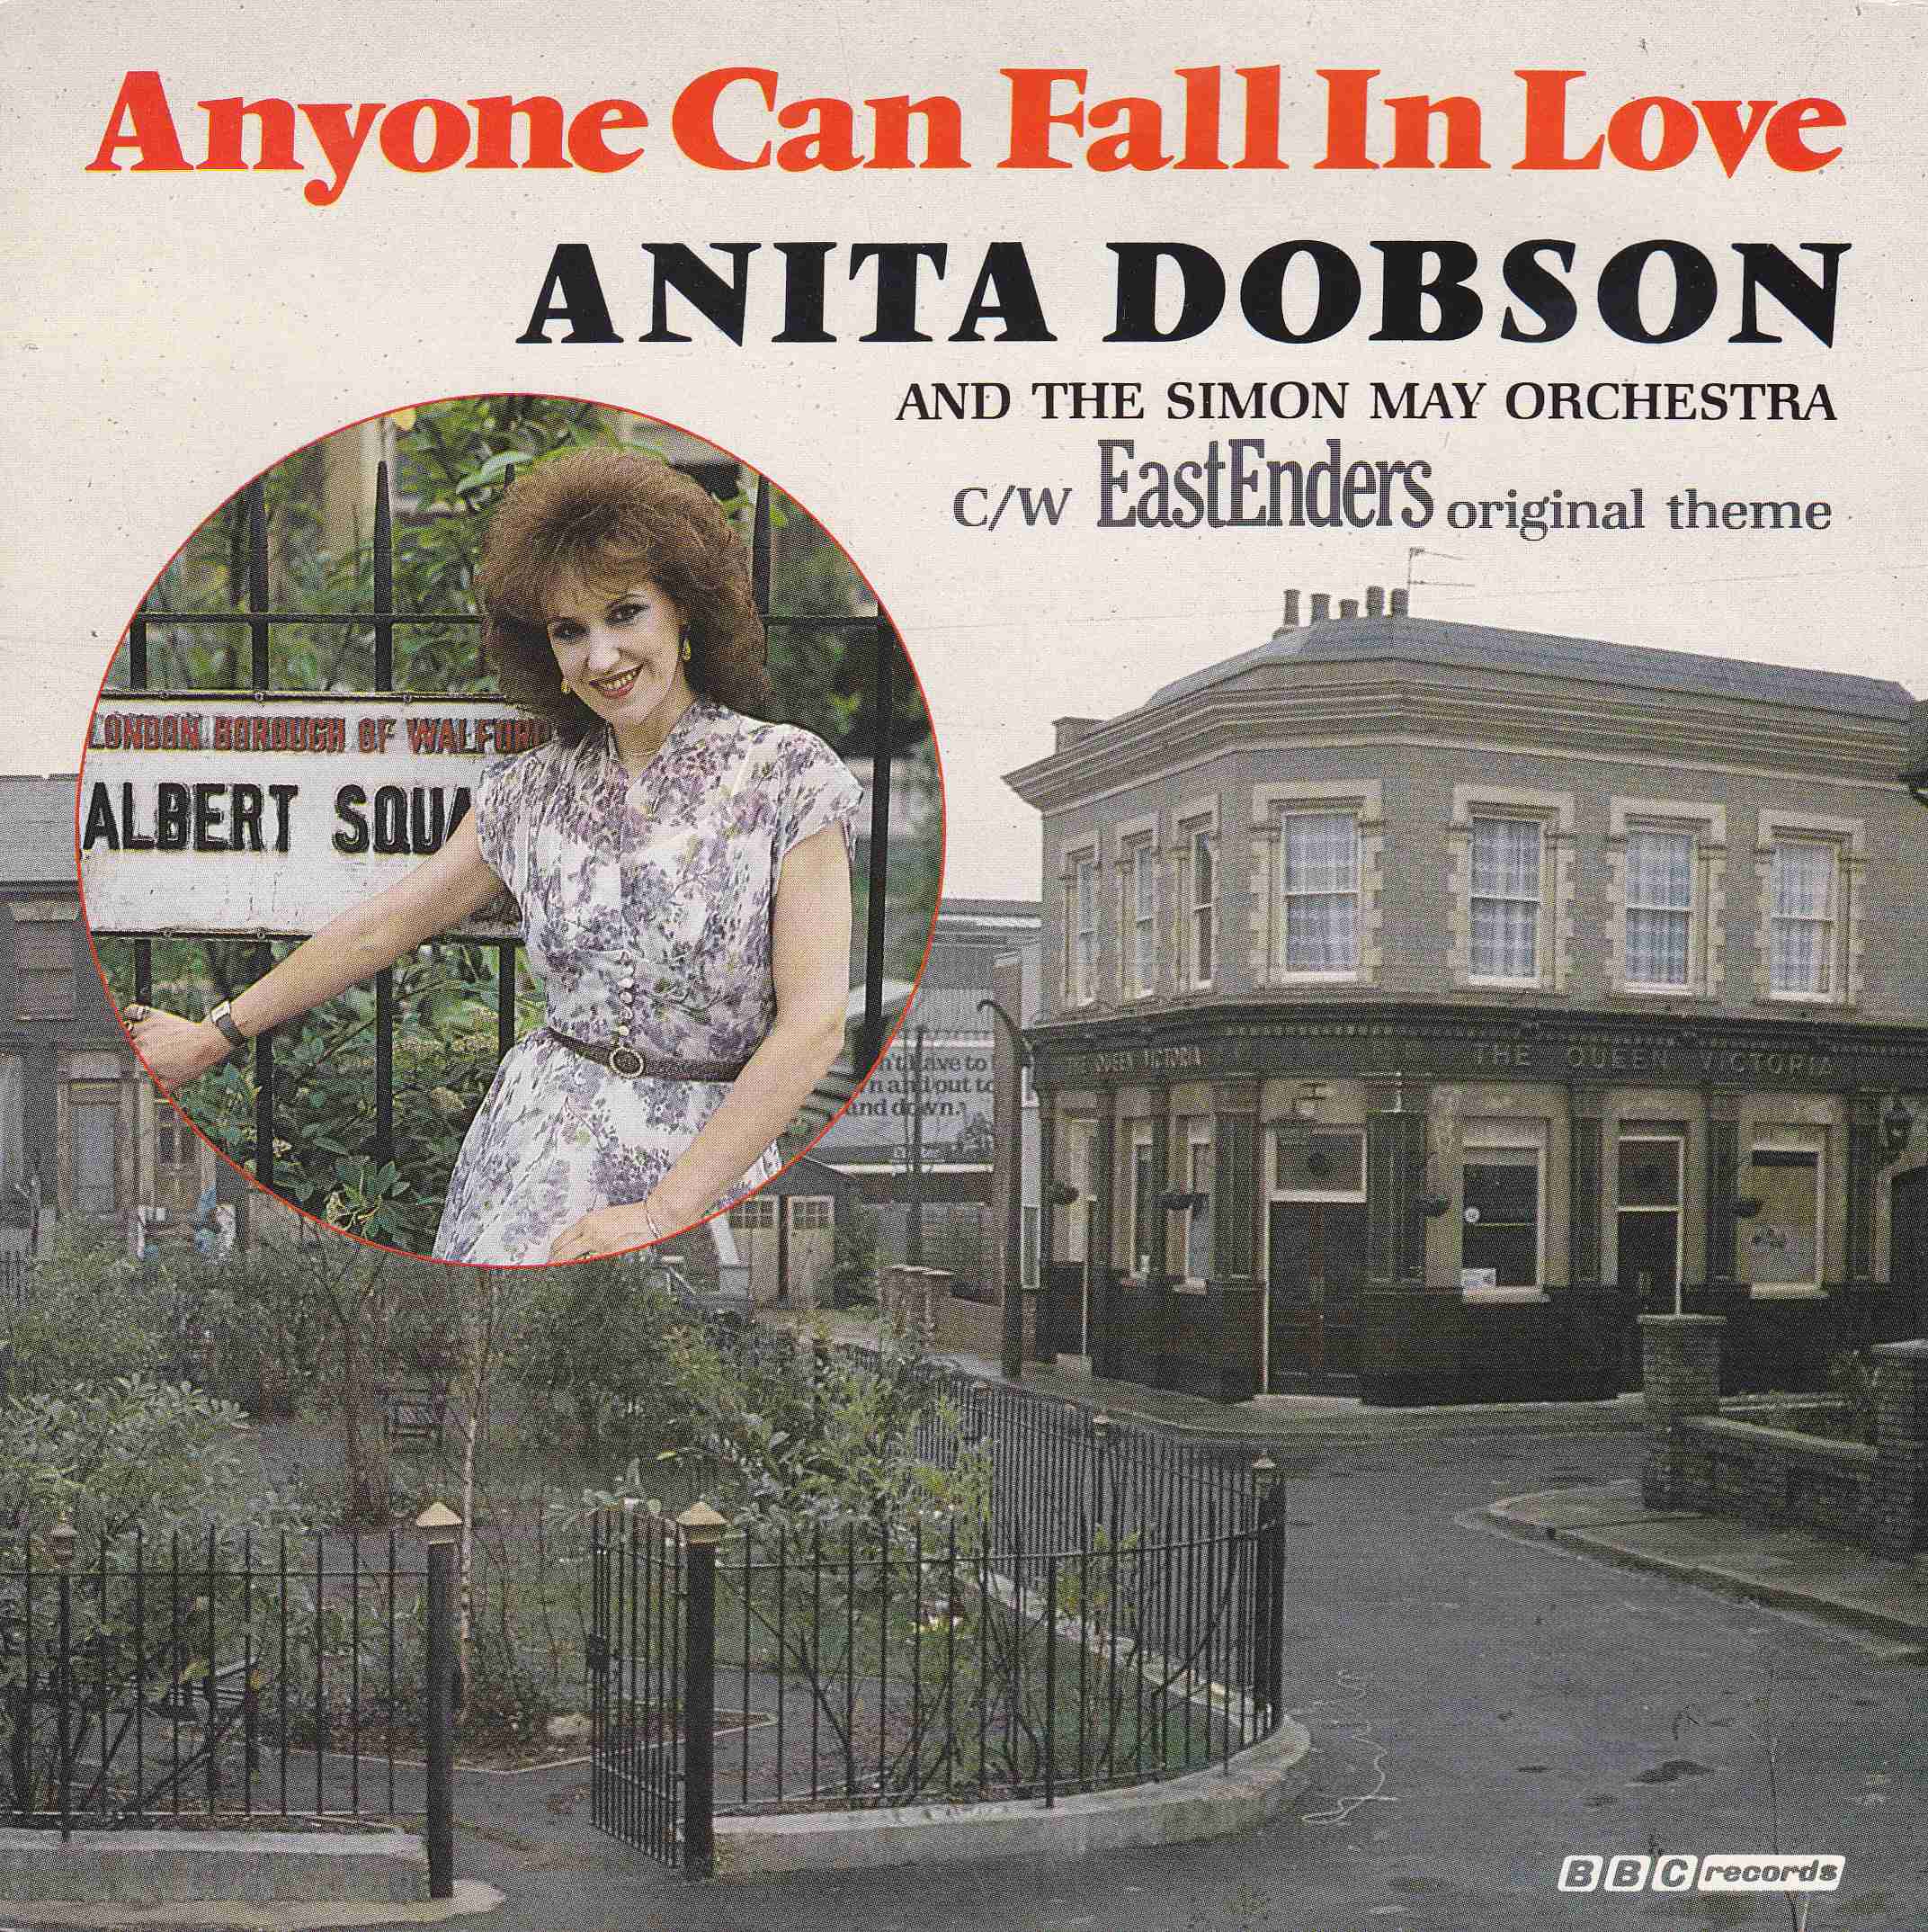 Picture of Anyone can fall in love (EastEnders) by artist Anita Dobson with the Simon May Orchestra from the BBC singles - Records and Tapes library